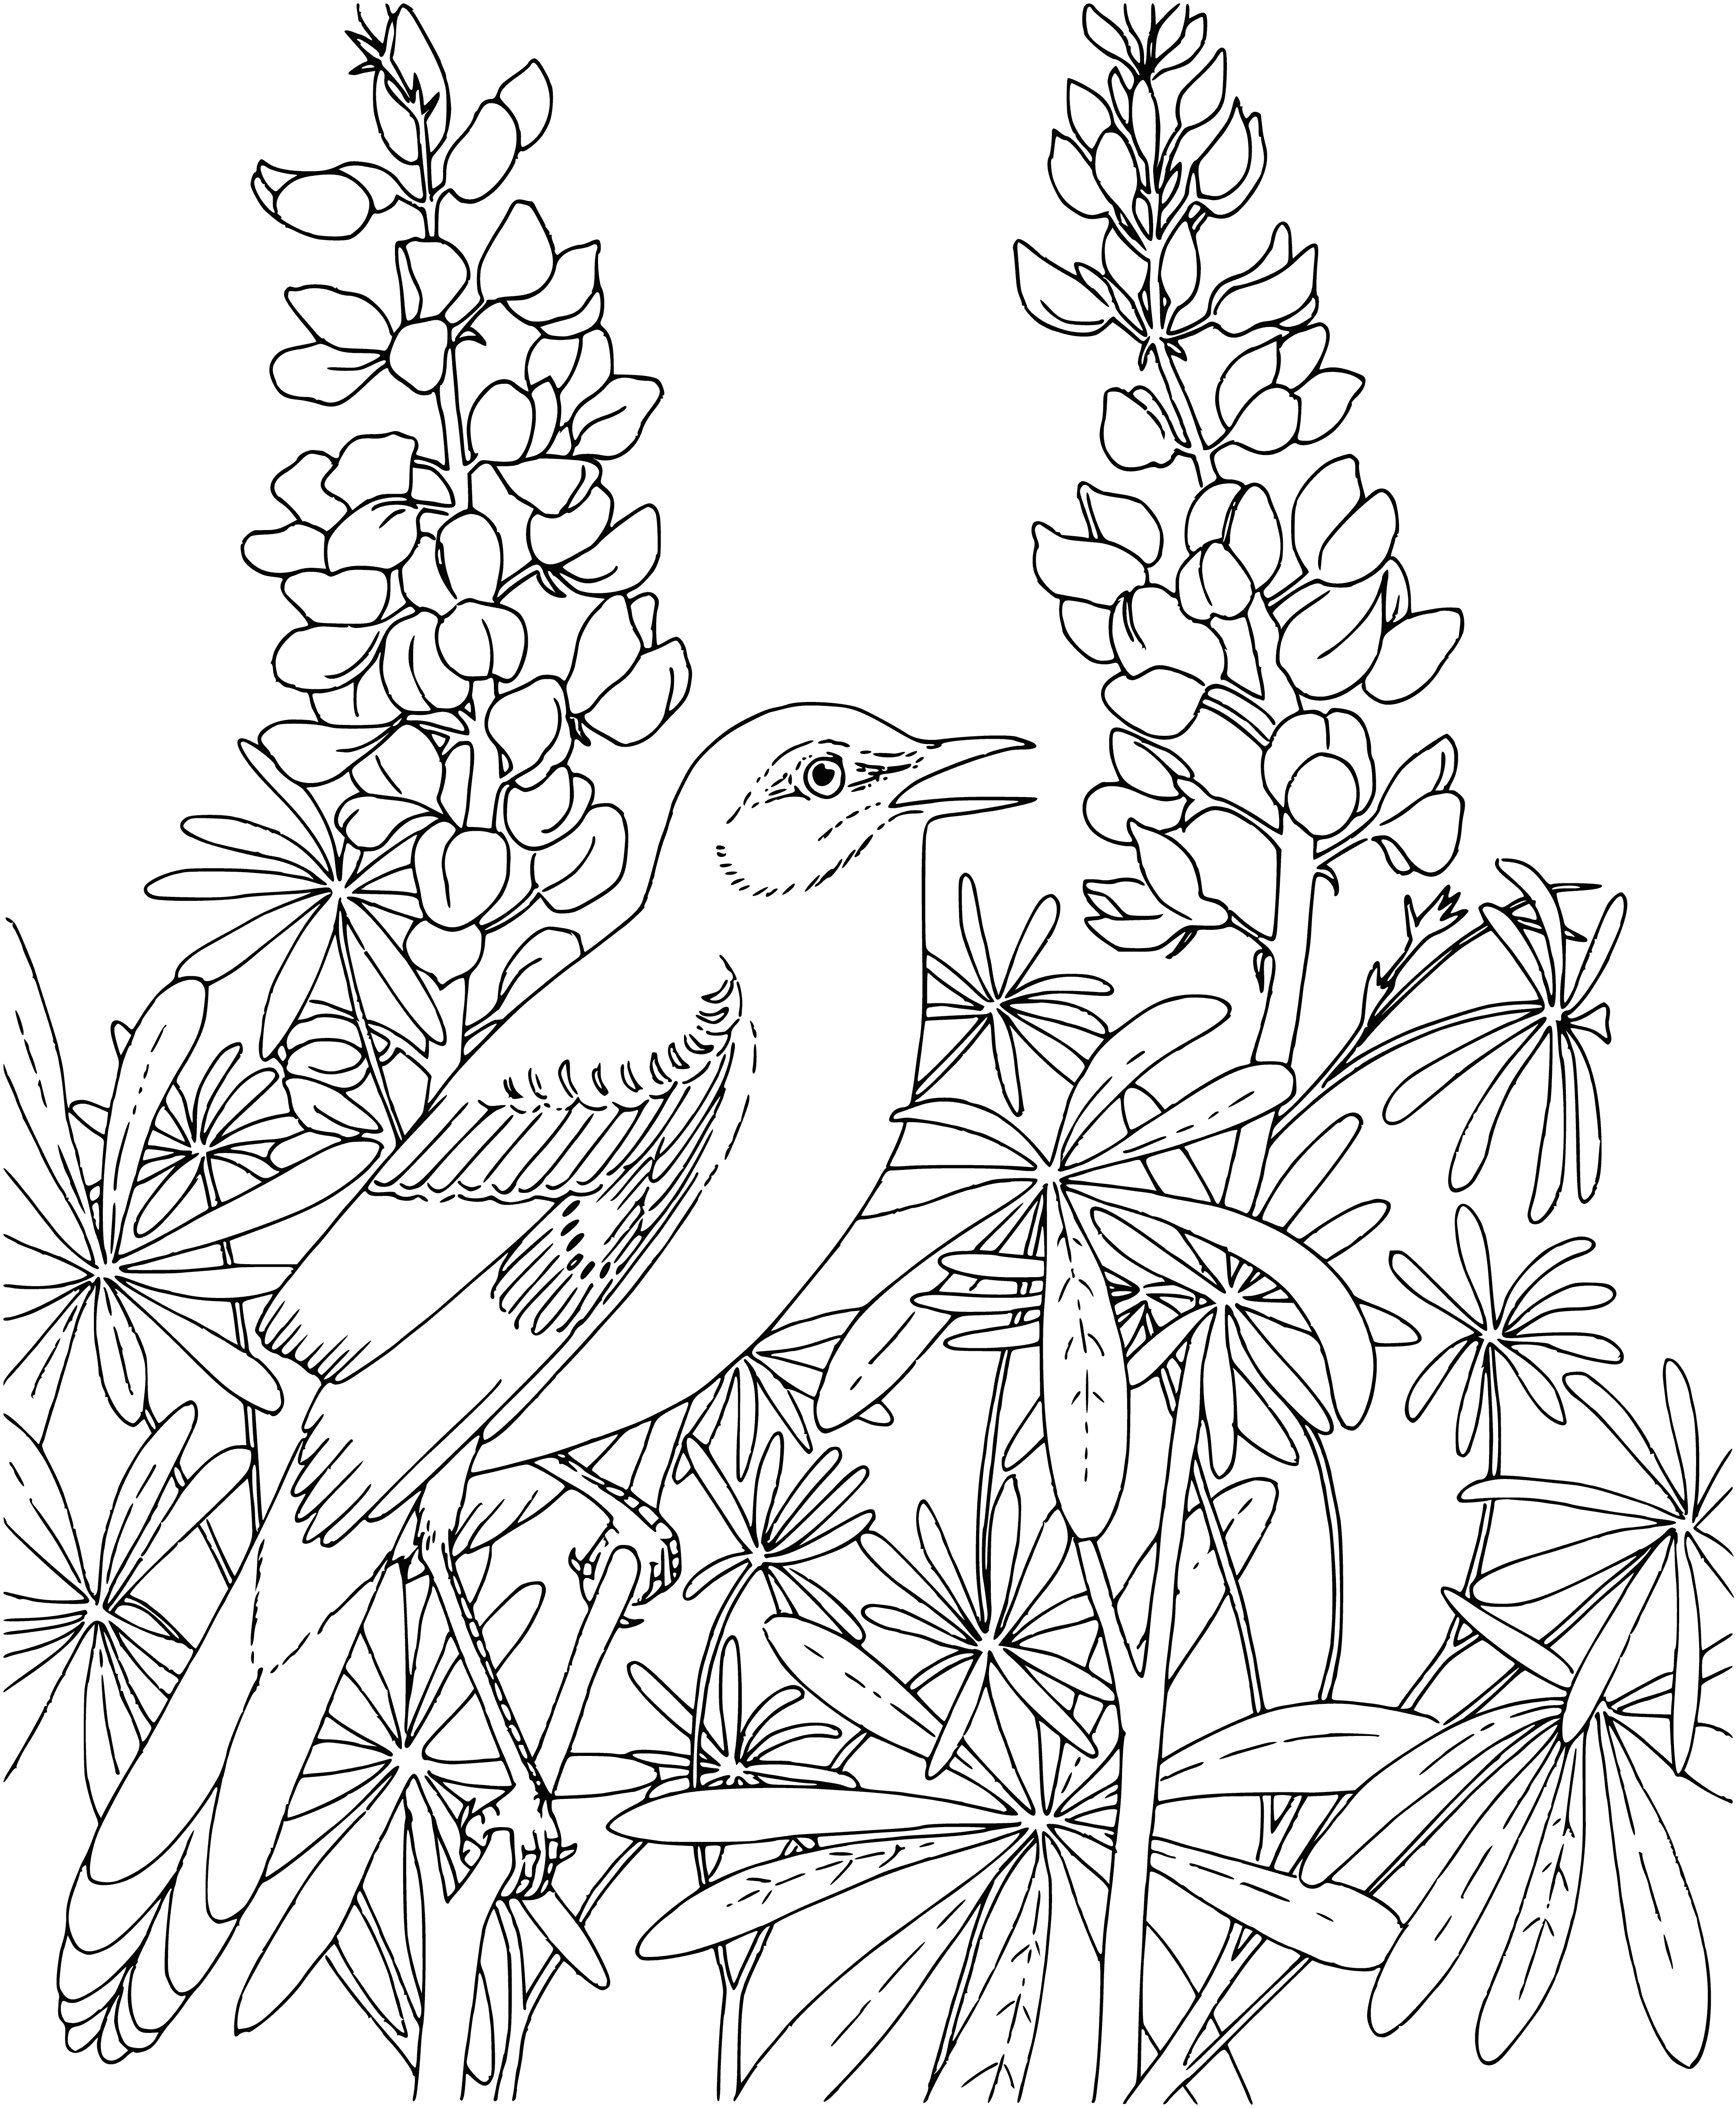 coloring page: Grey bird with white markings and curved beak sitting on branch in tree with long tail.